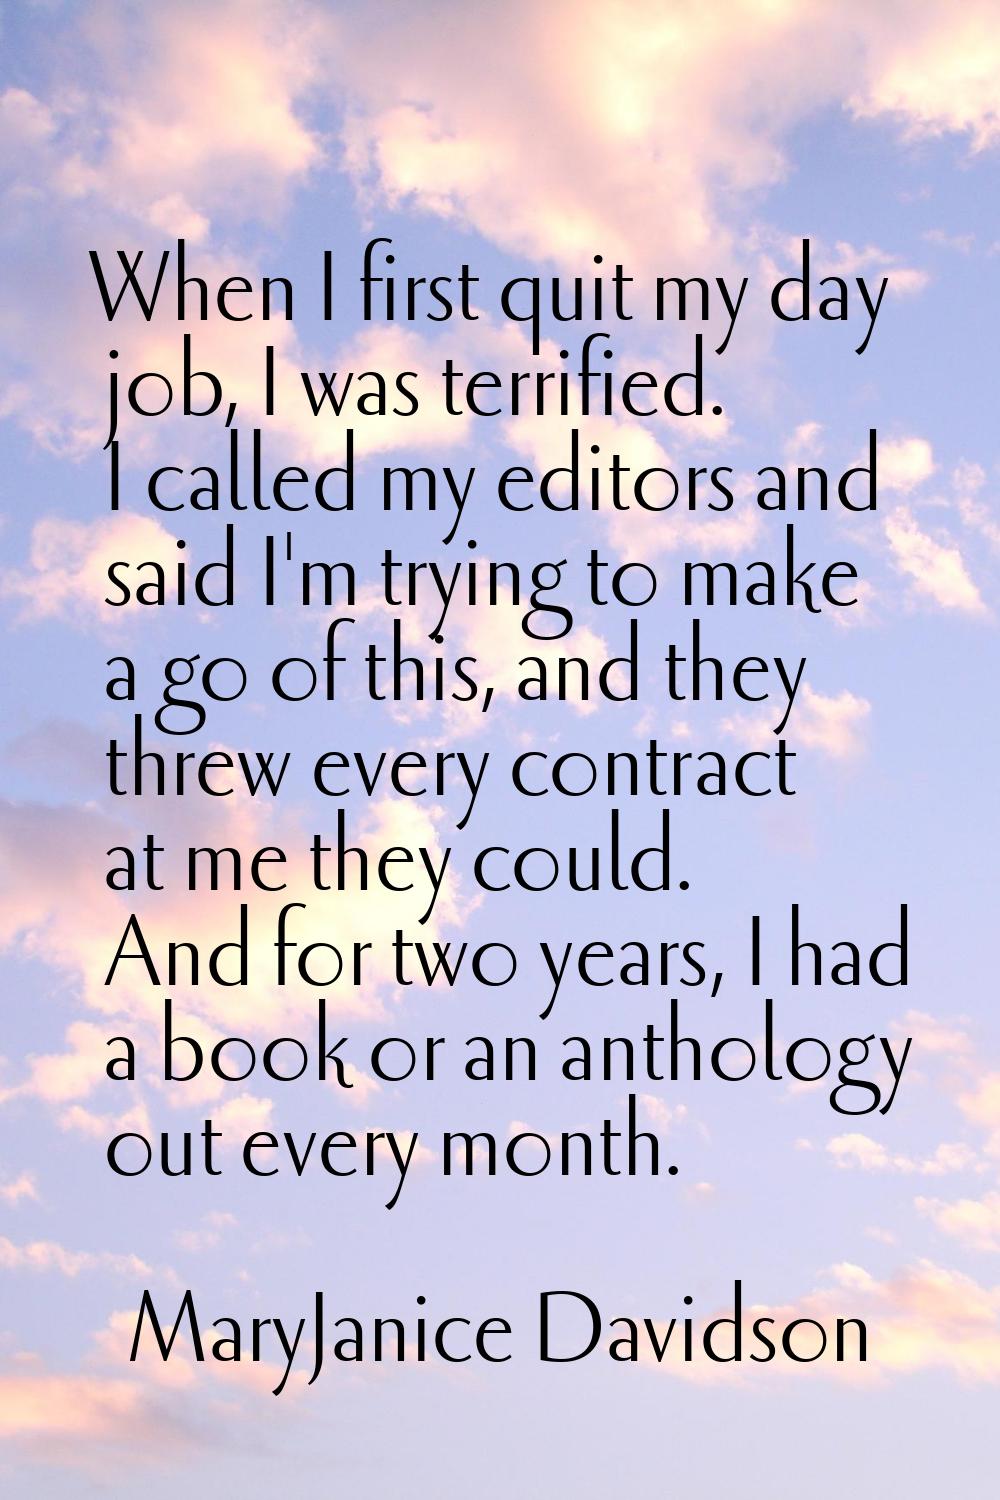 When I first quit my day job, I was terrified. I called my editors and said I'm trying to make a go